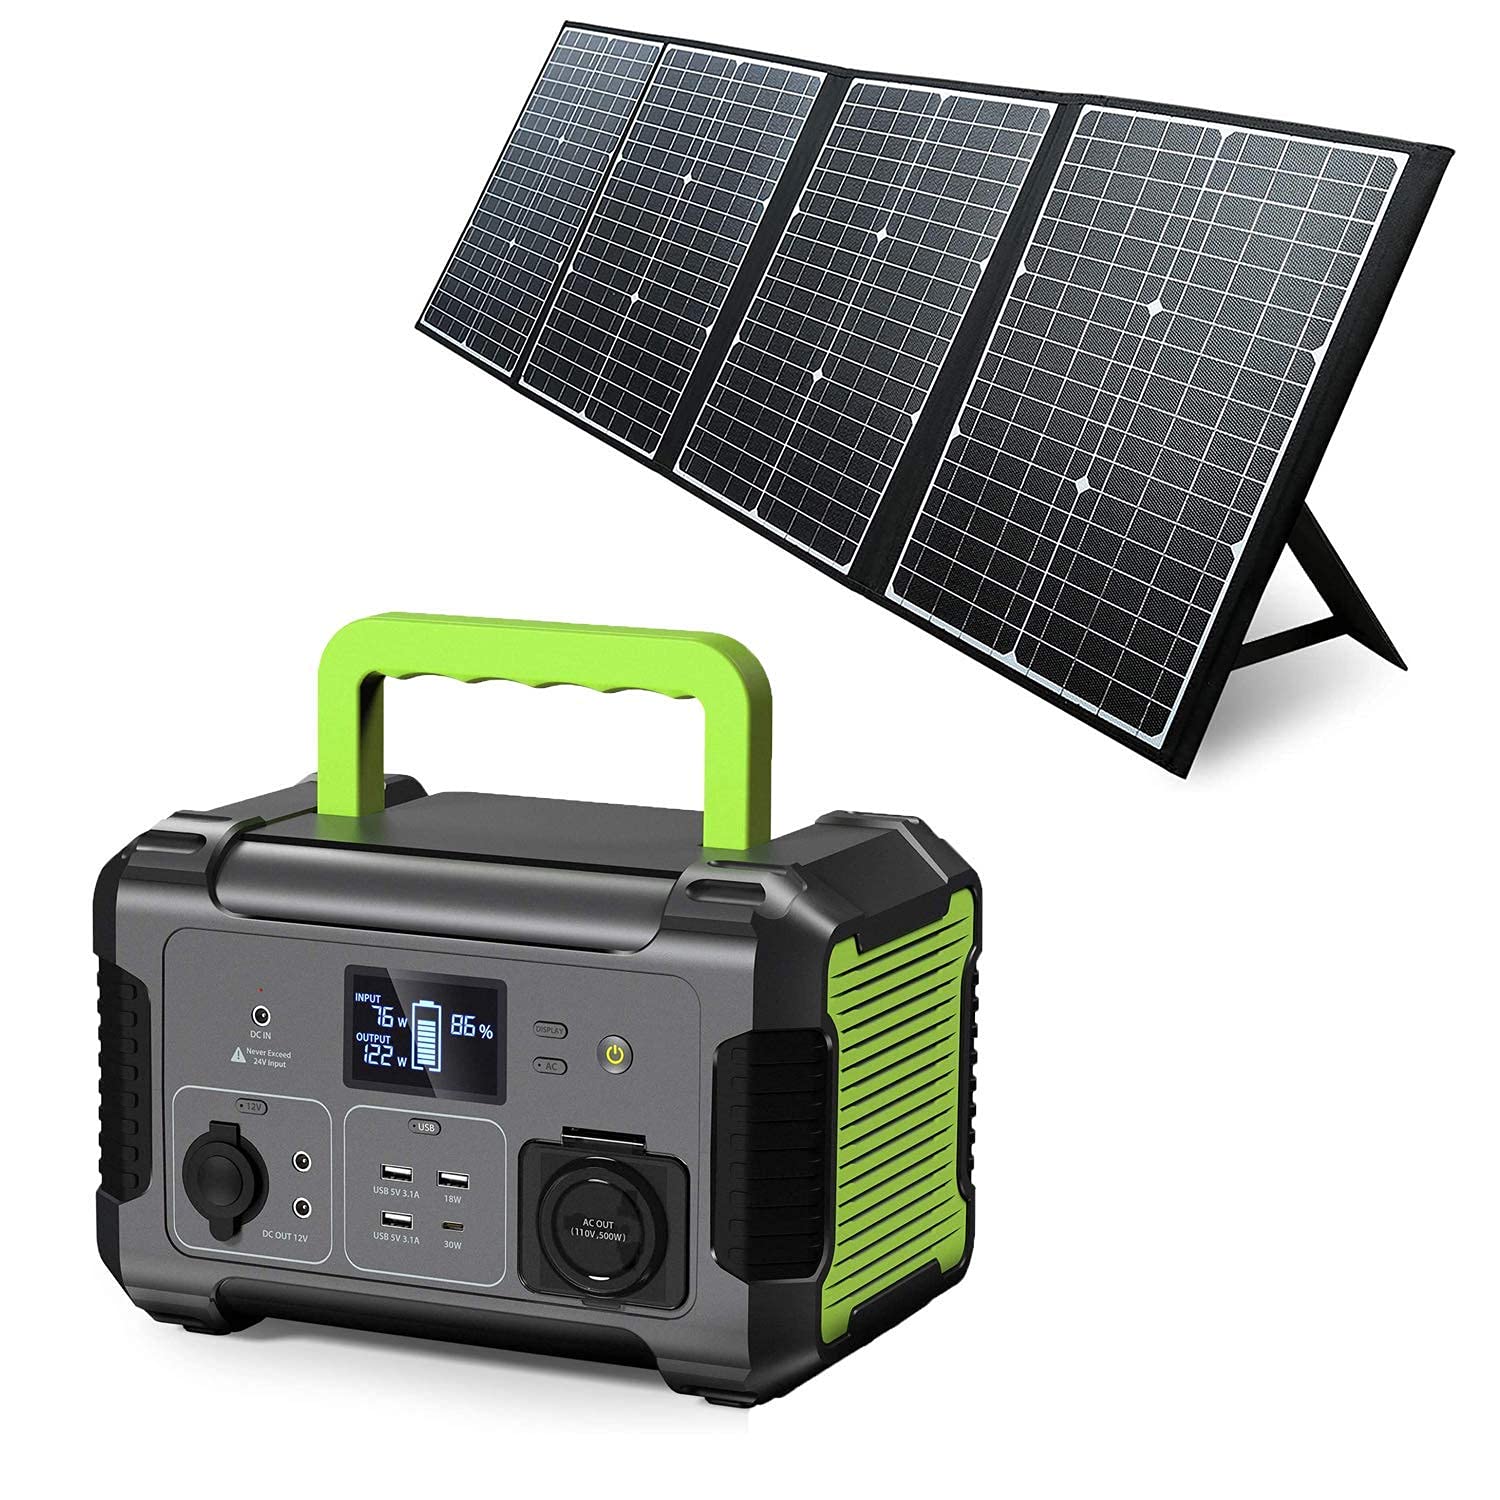 PAXCESS Portable Power Station 300W with Solar Panel Included